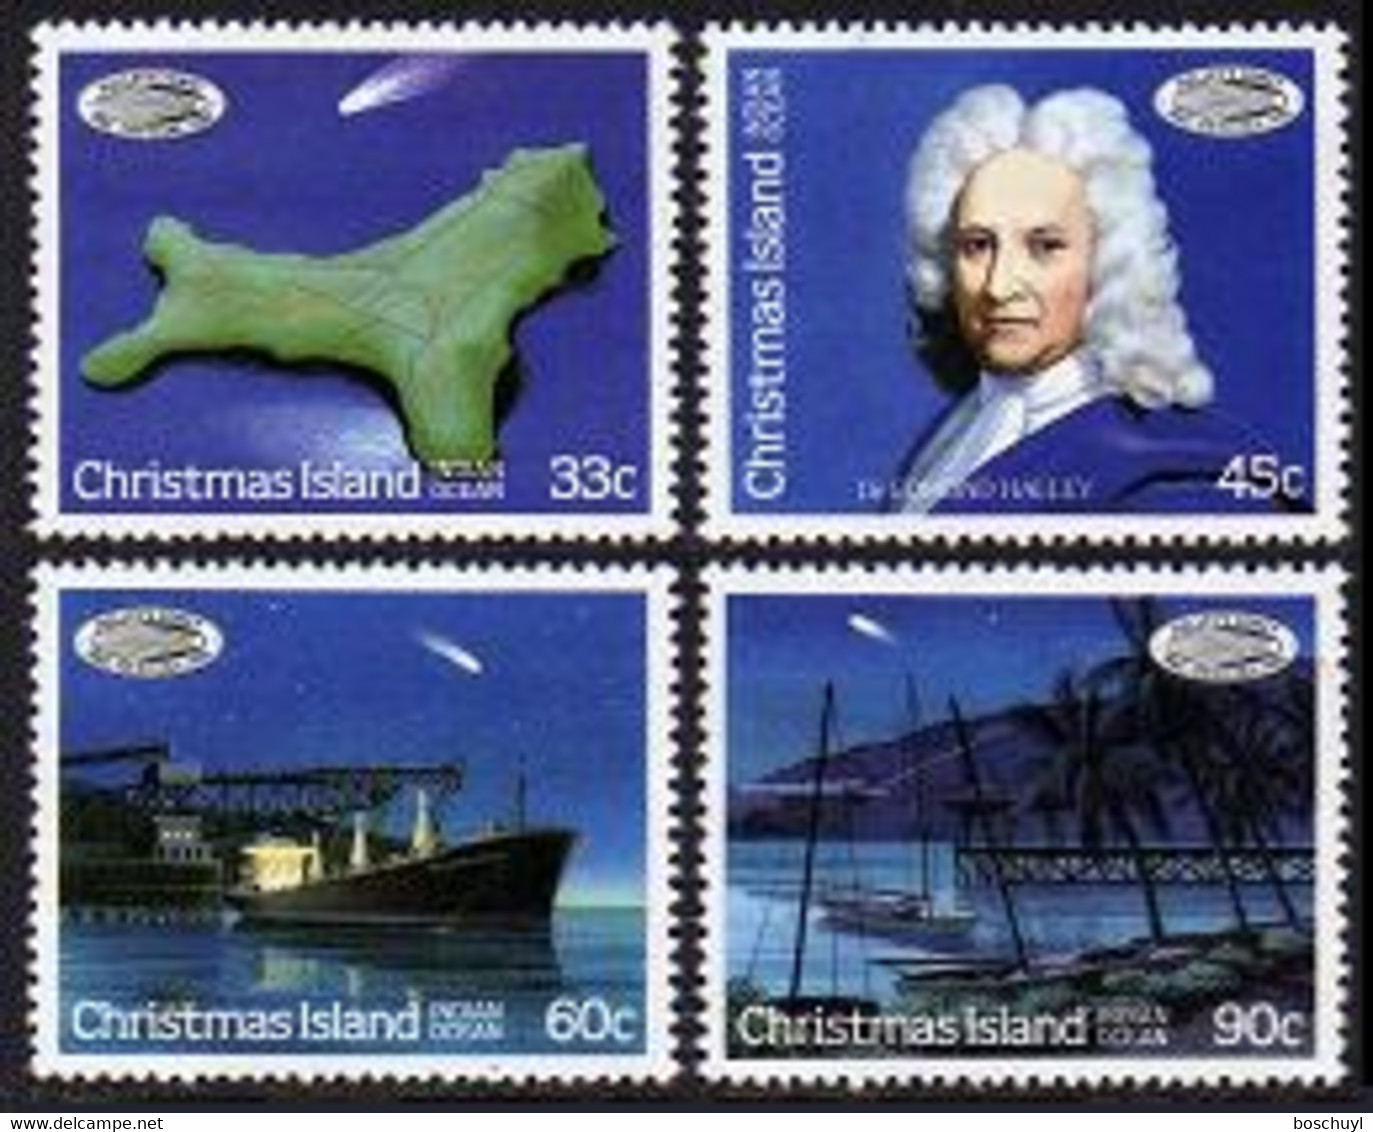 Christmas Island, 1986, Halley's Comet, Space, MNH, Michel 216-219 - Christmaseiland